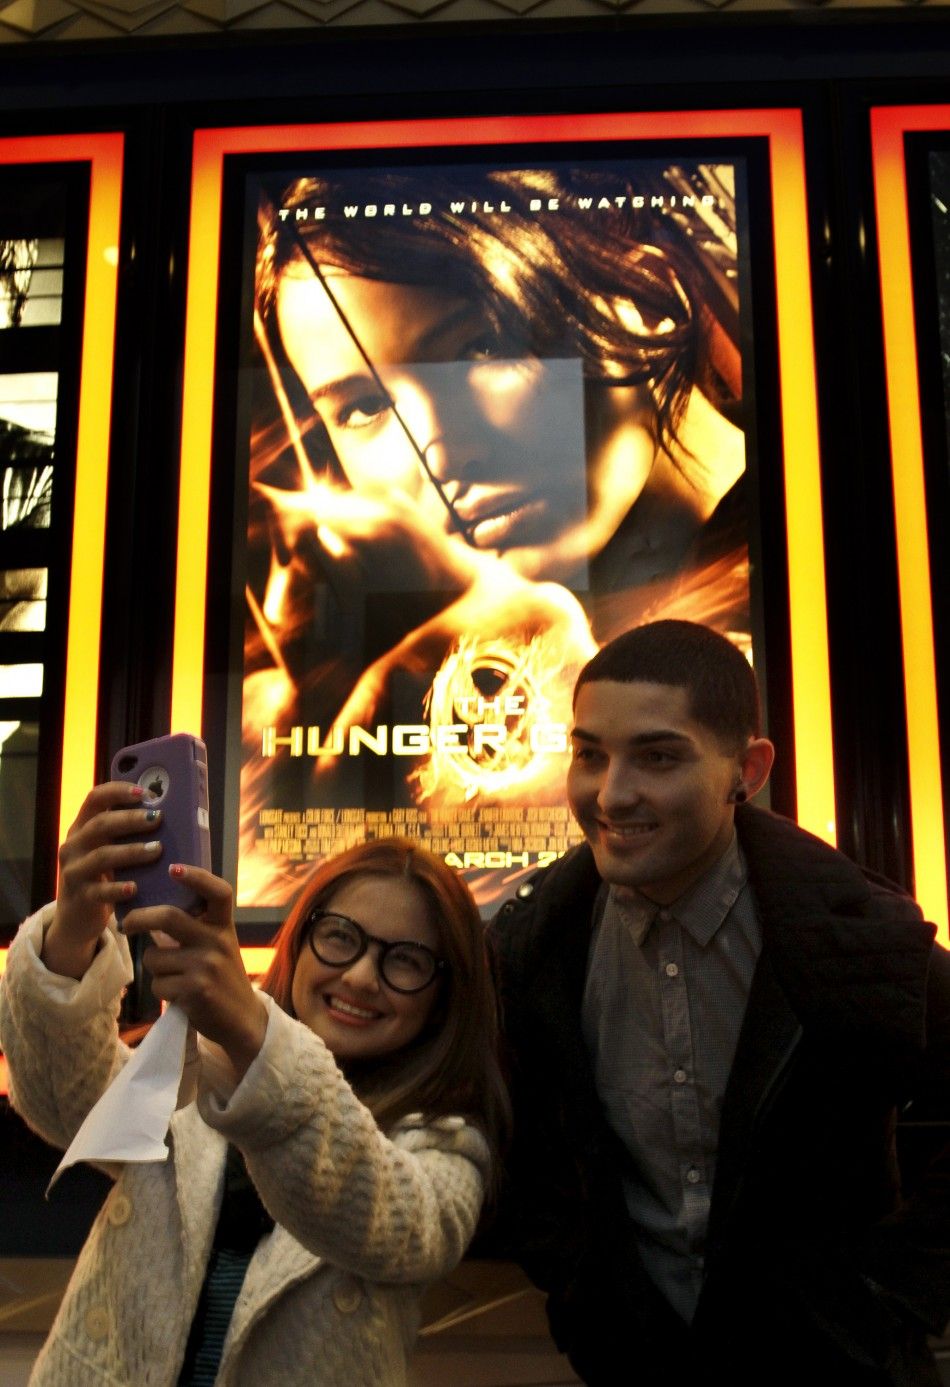 Elizabeth Arellano and Sal Arellano pose for a photo in front of a movie poster of quotThe Hunger Gamesquot at Regal Cinemas in Los Angeles, California March 22, 2012.